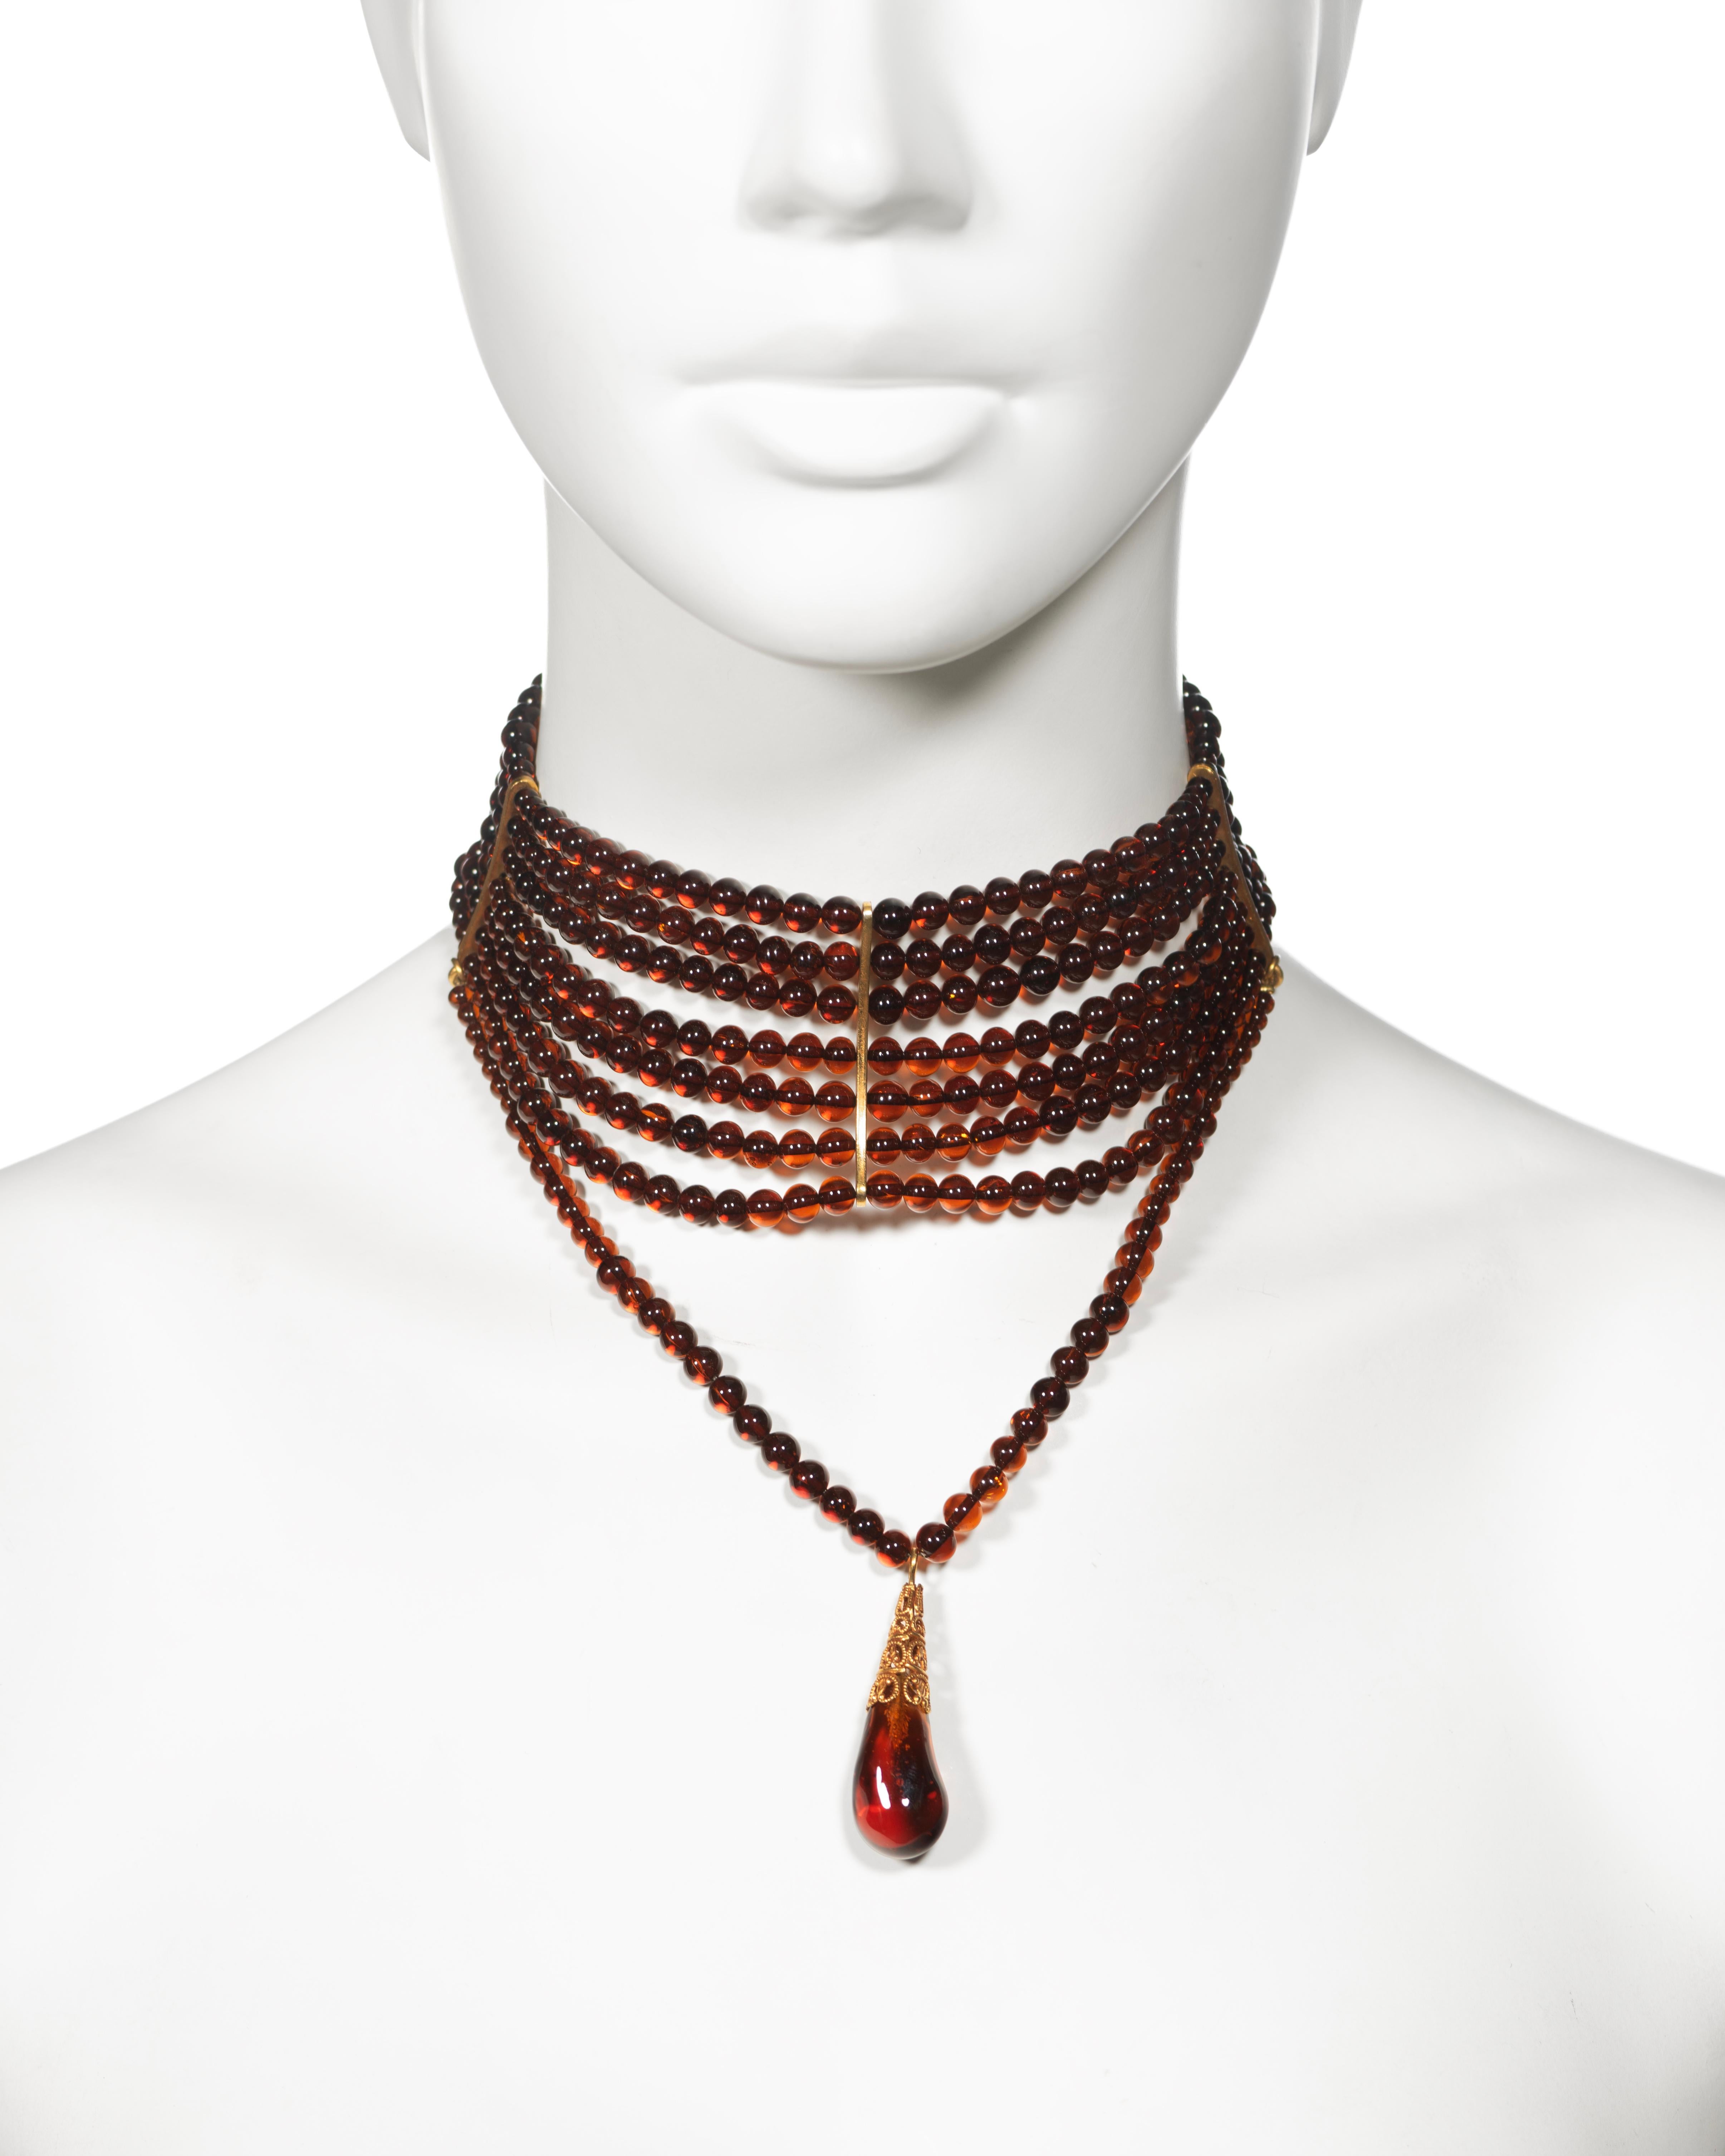 Art Deco Christian Dior by John Galliano Amber Glass Bead Choker Necklace, c. 1998 For Sale